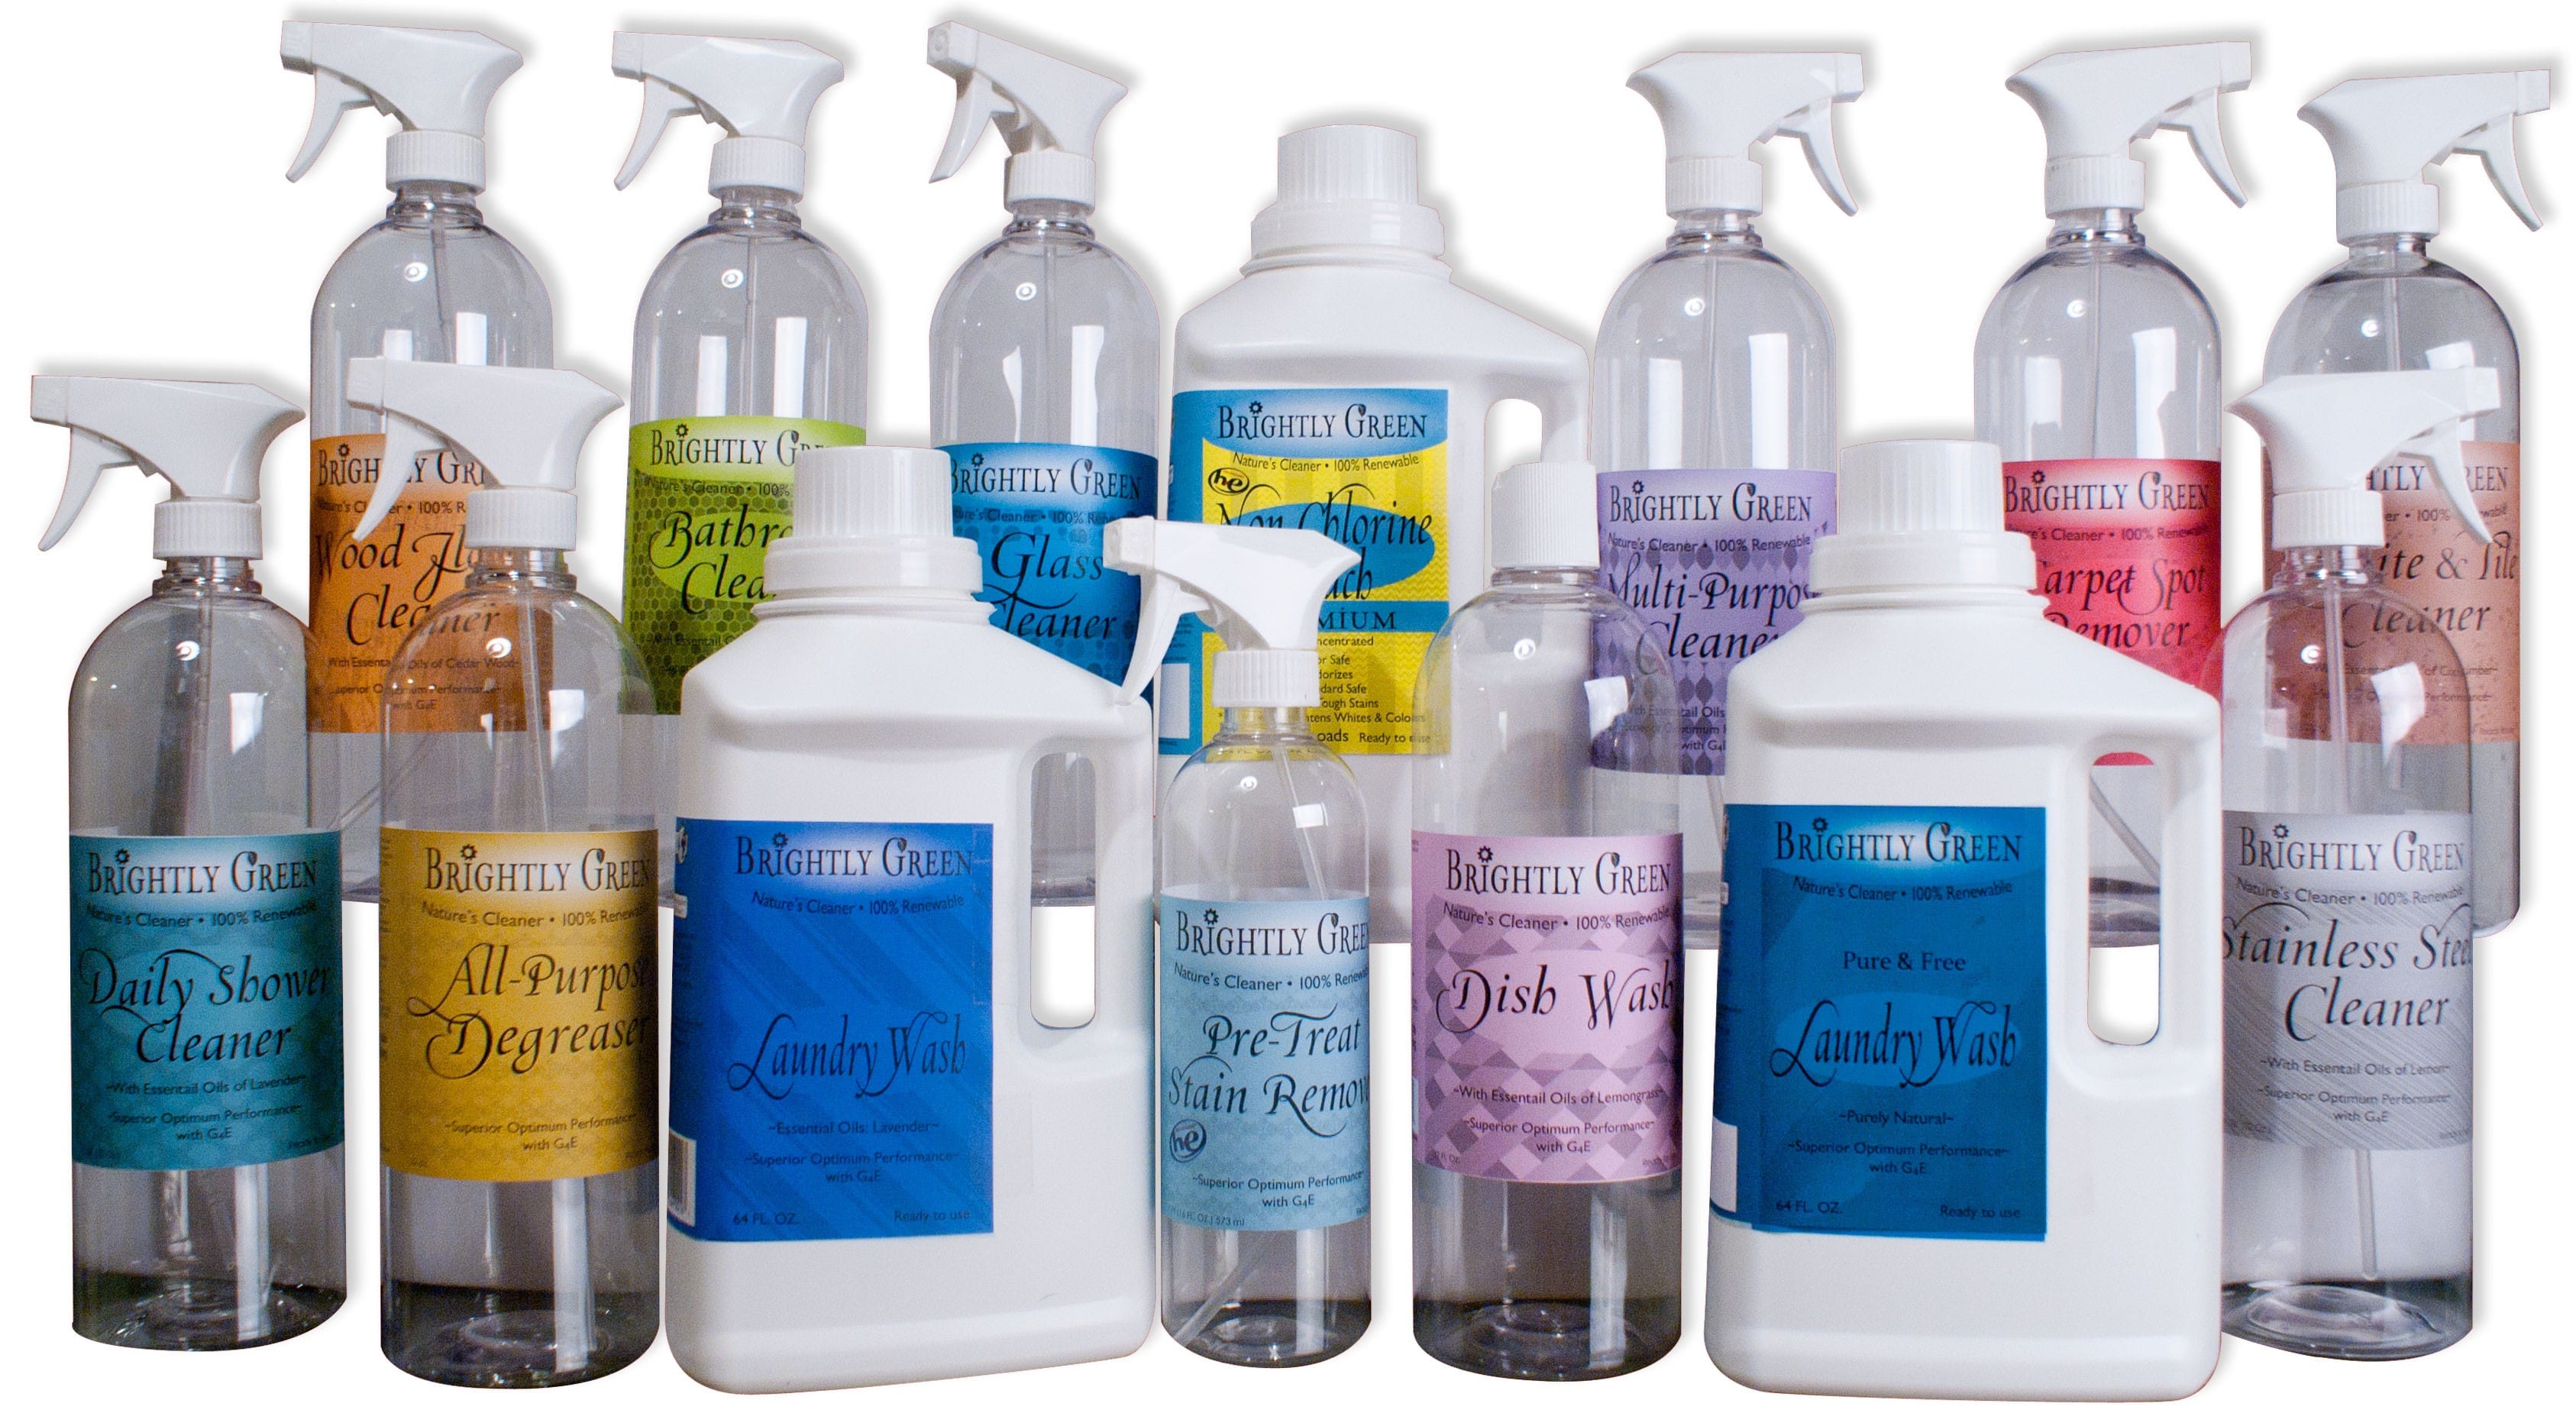 Eco friendly, green cleaning, Earth frindly, safe green products, Kid friendly, Pet friendly safe green cleaning products